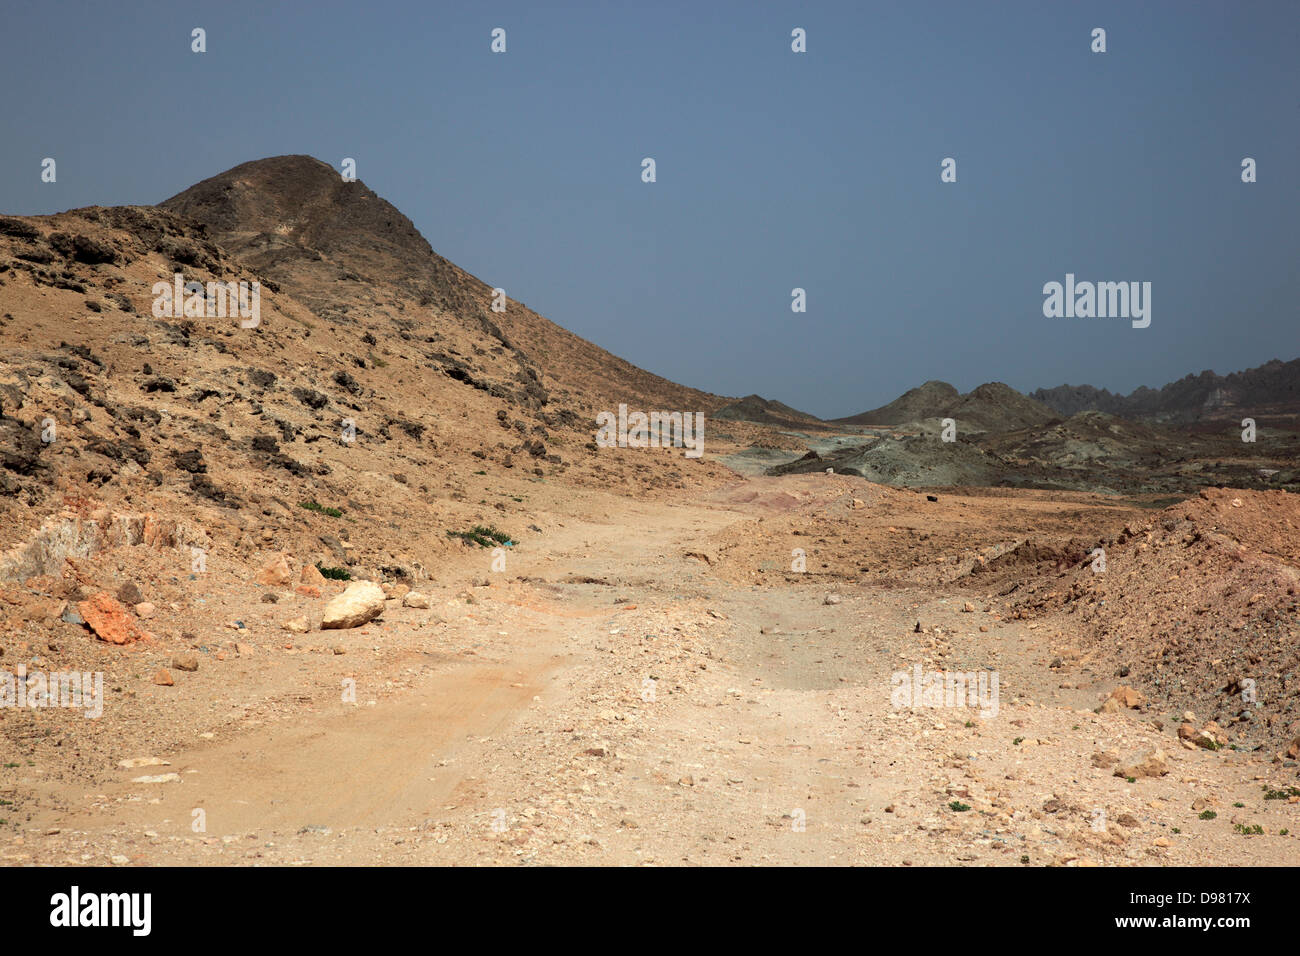 Scenery in the runners of the Dhofar mountain chain in southern Oman  Stock Photo